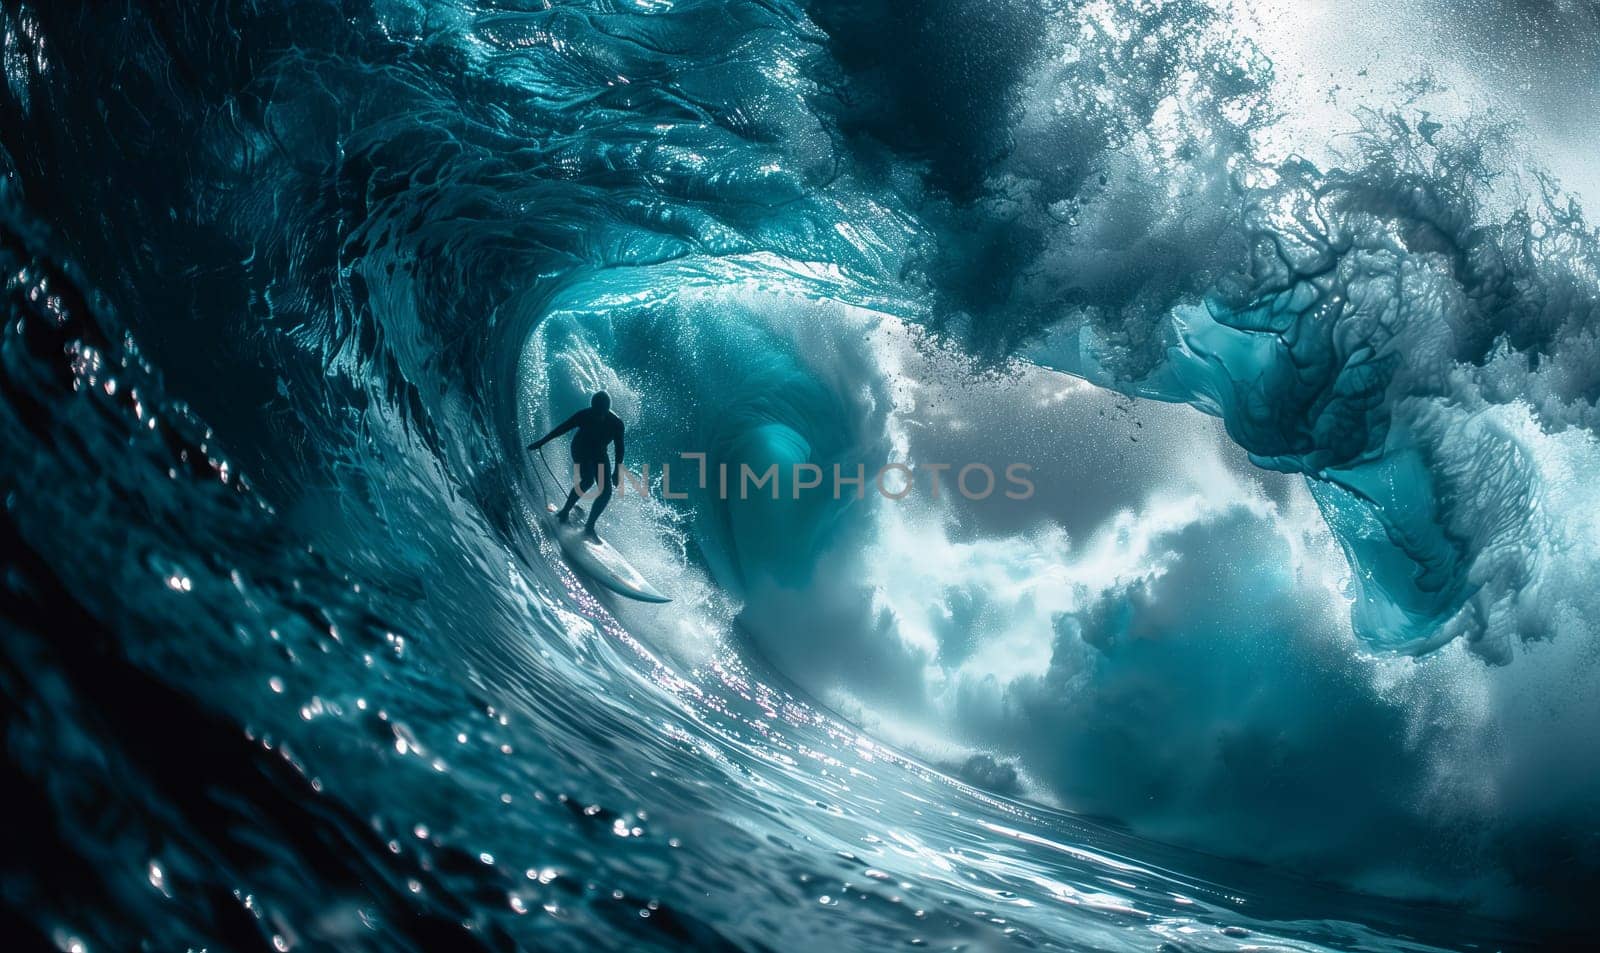 A surfer is riding a wind wave on the electric blue water of the ocean, against the backdrop of a clear sky. This extreme sport combines fluid movement and breathtaking landscape views